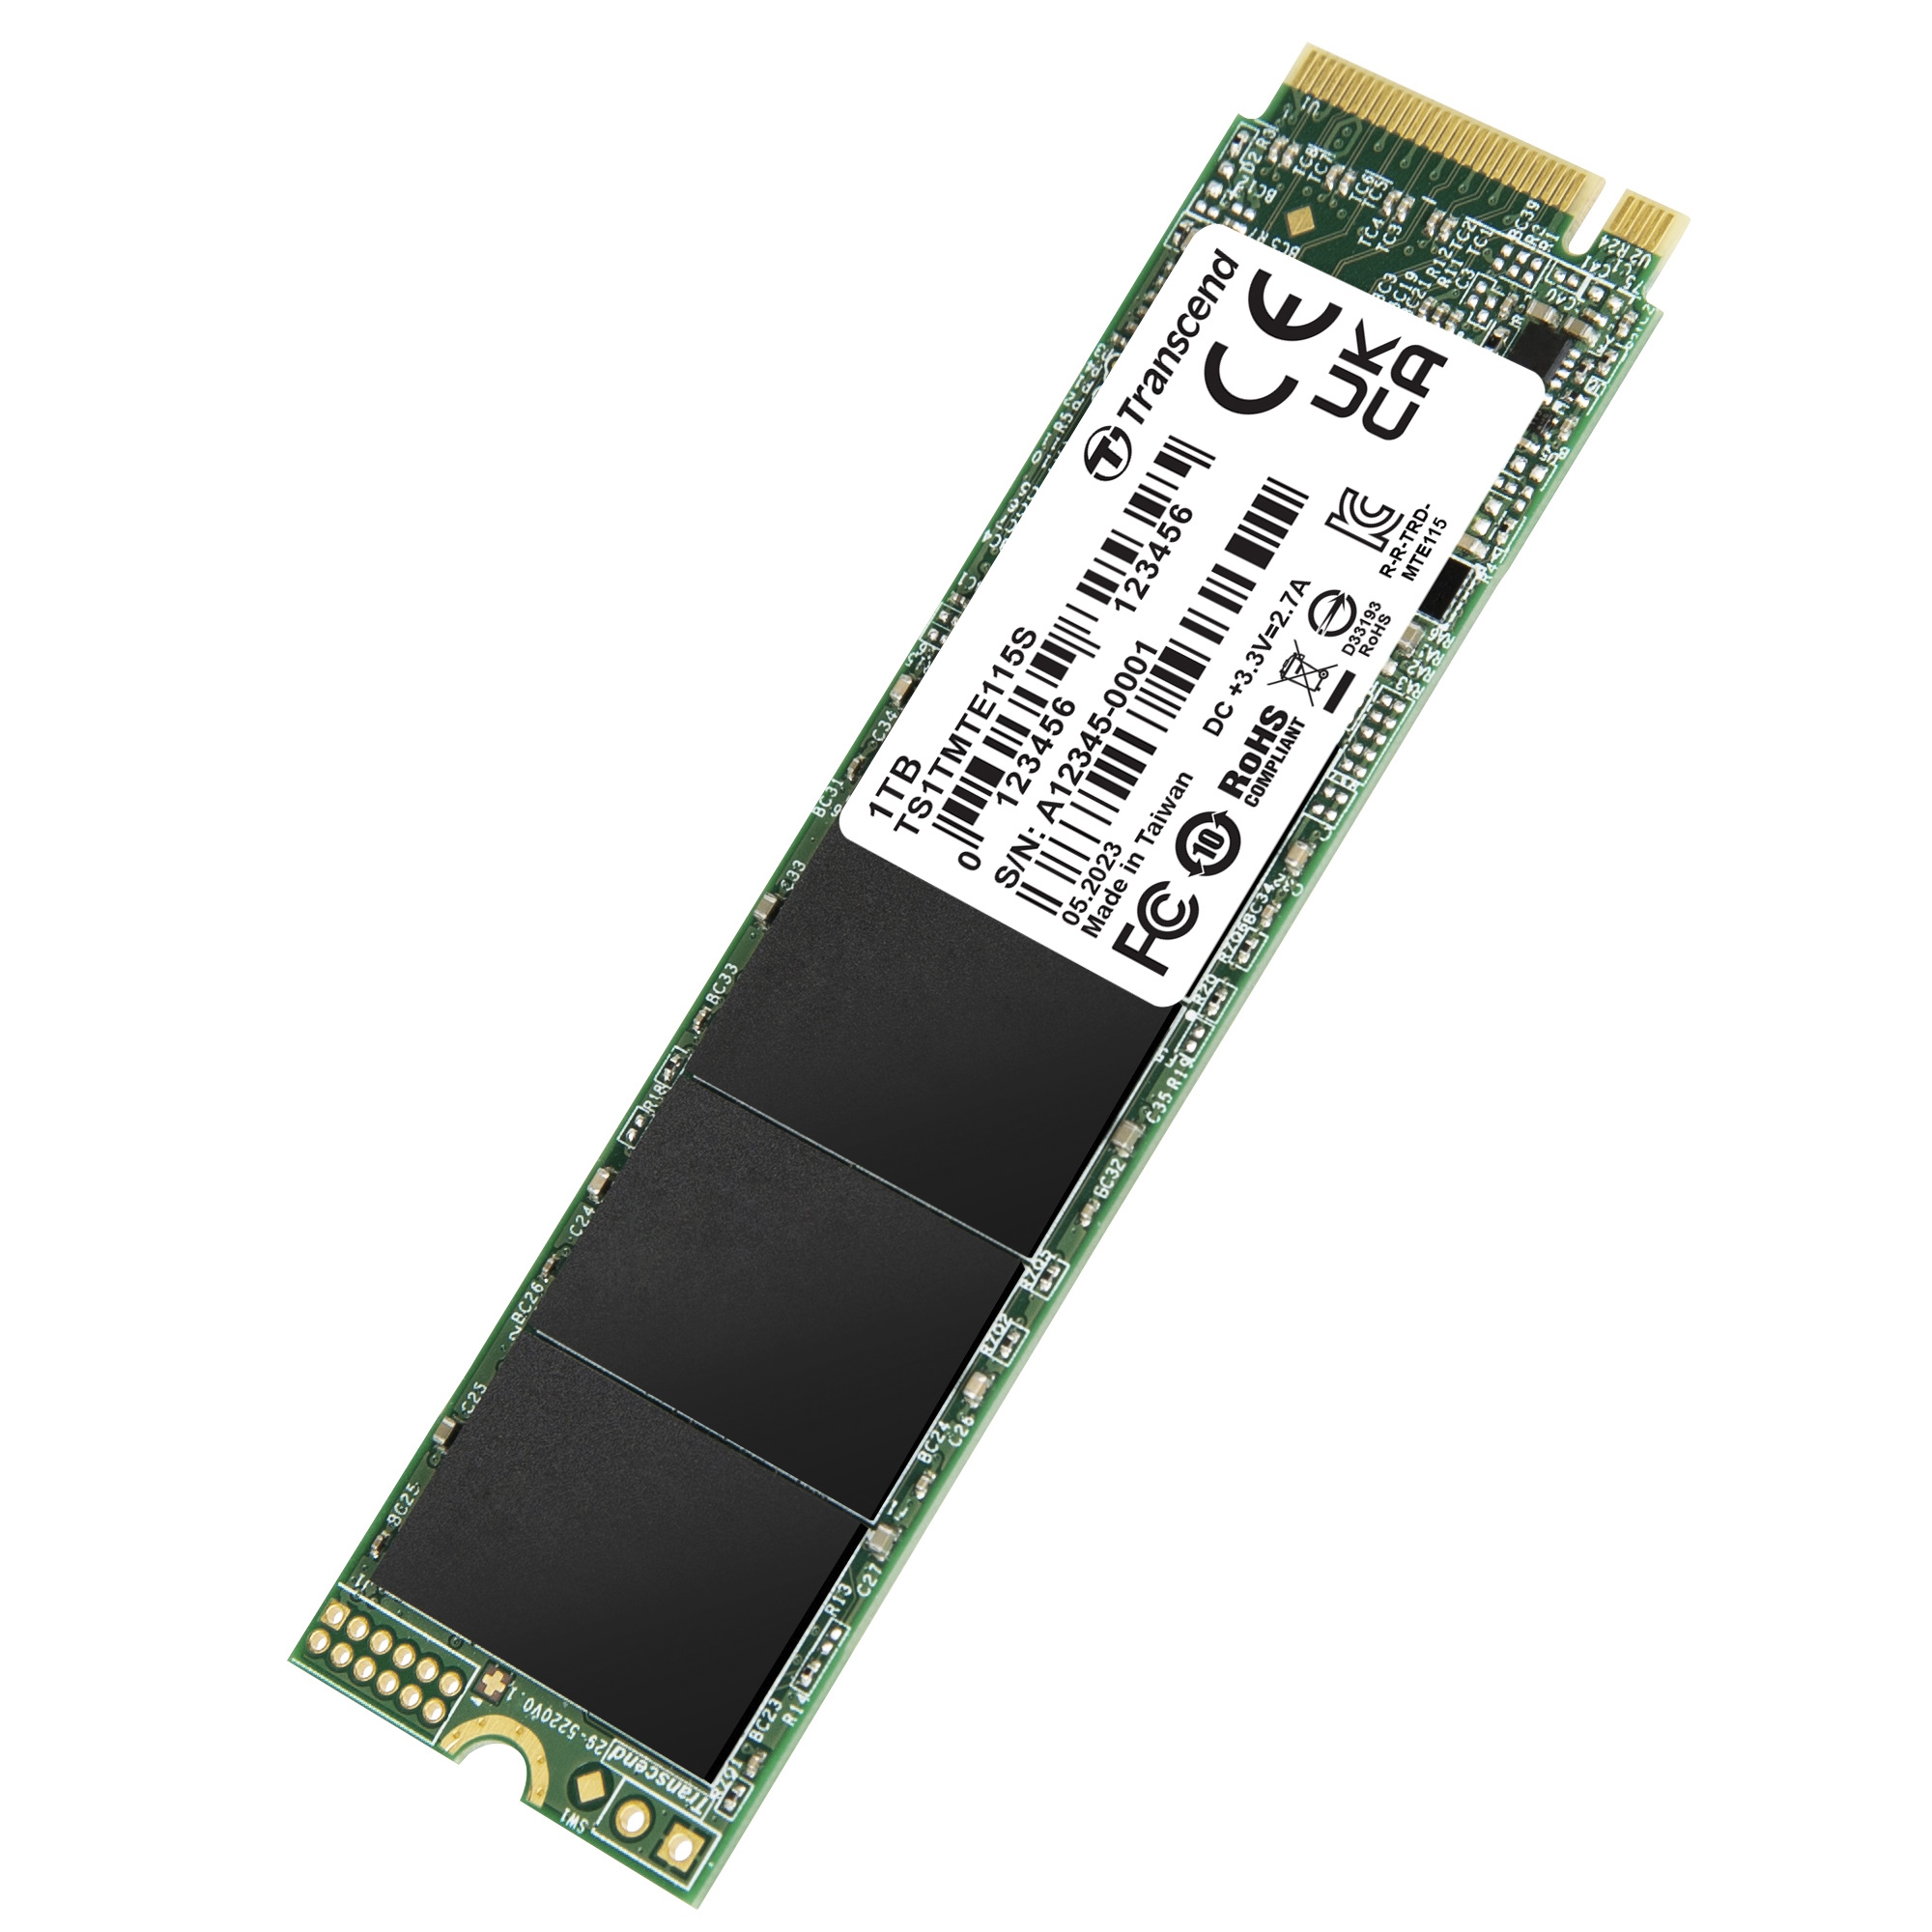 Transcend 128GB SSD for WS6 (TS128SSD)